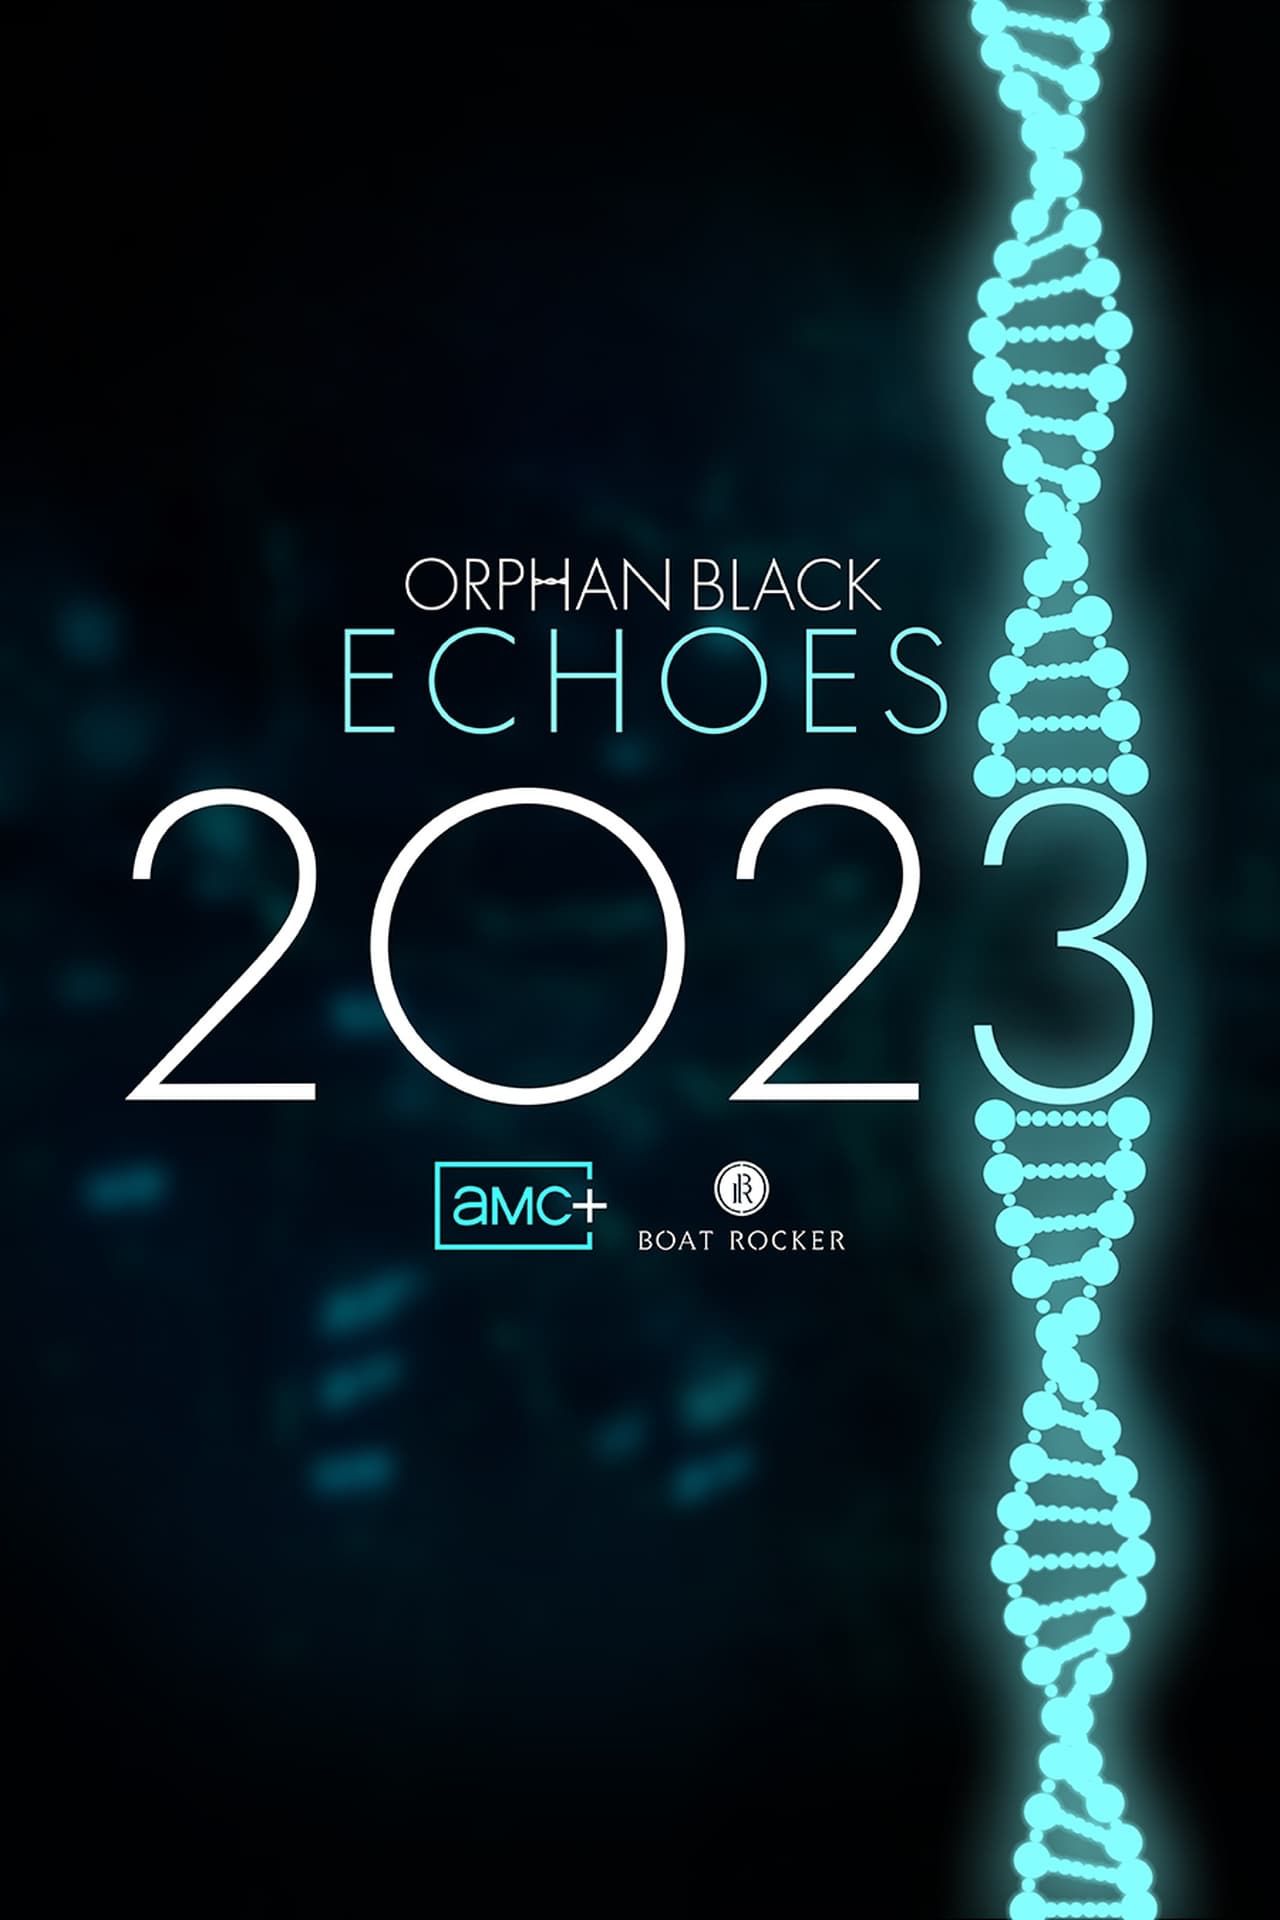 Orphan Black Echoes TV Poster